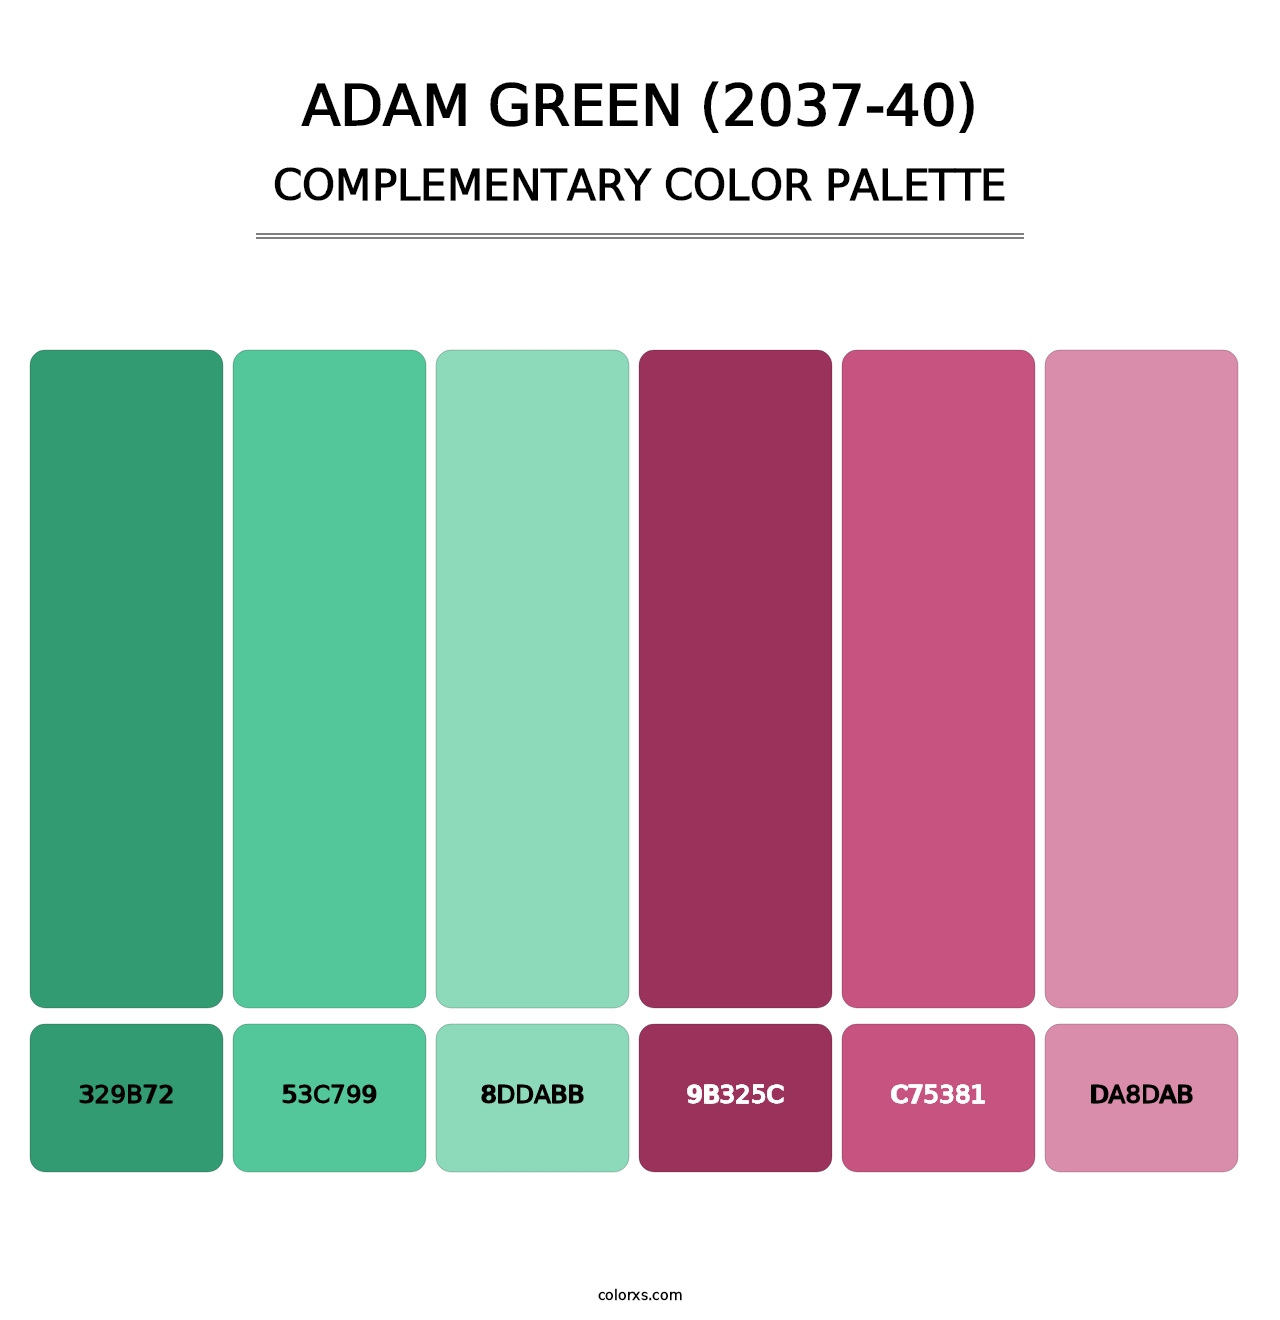 Adam Green (2037-40) - Complementary Color Palette